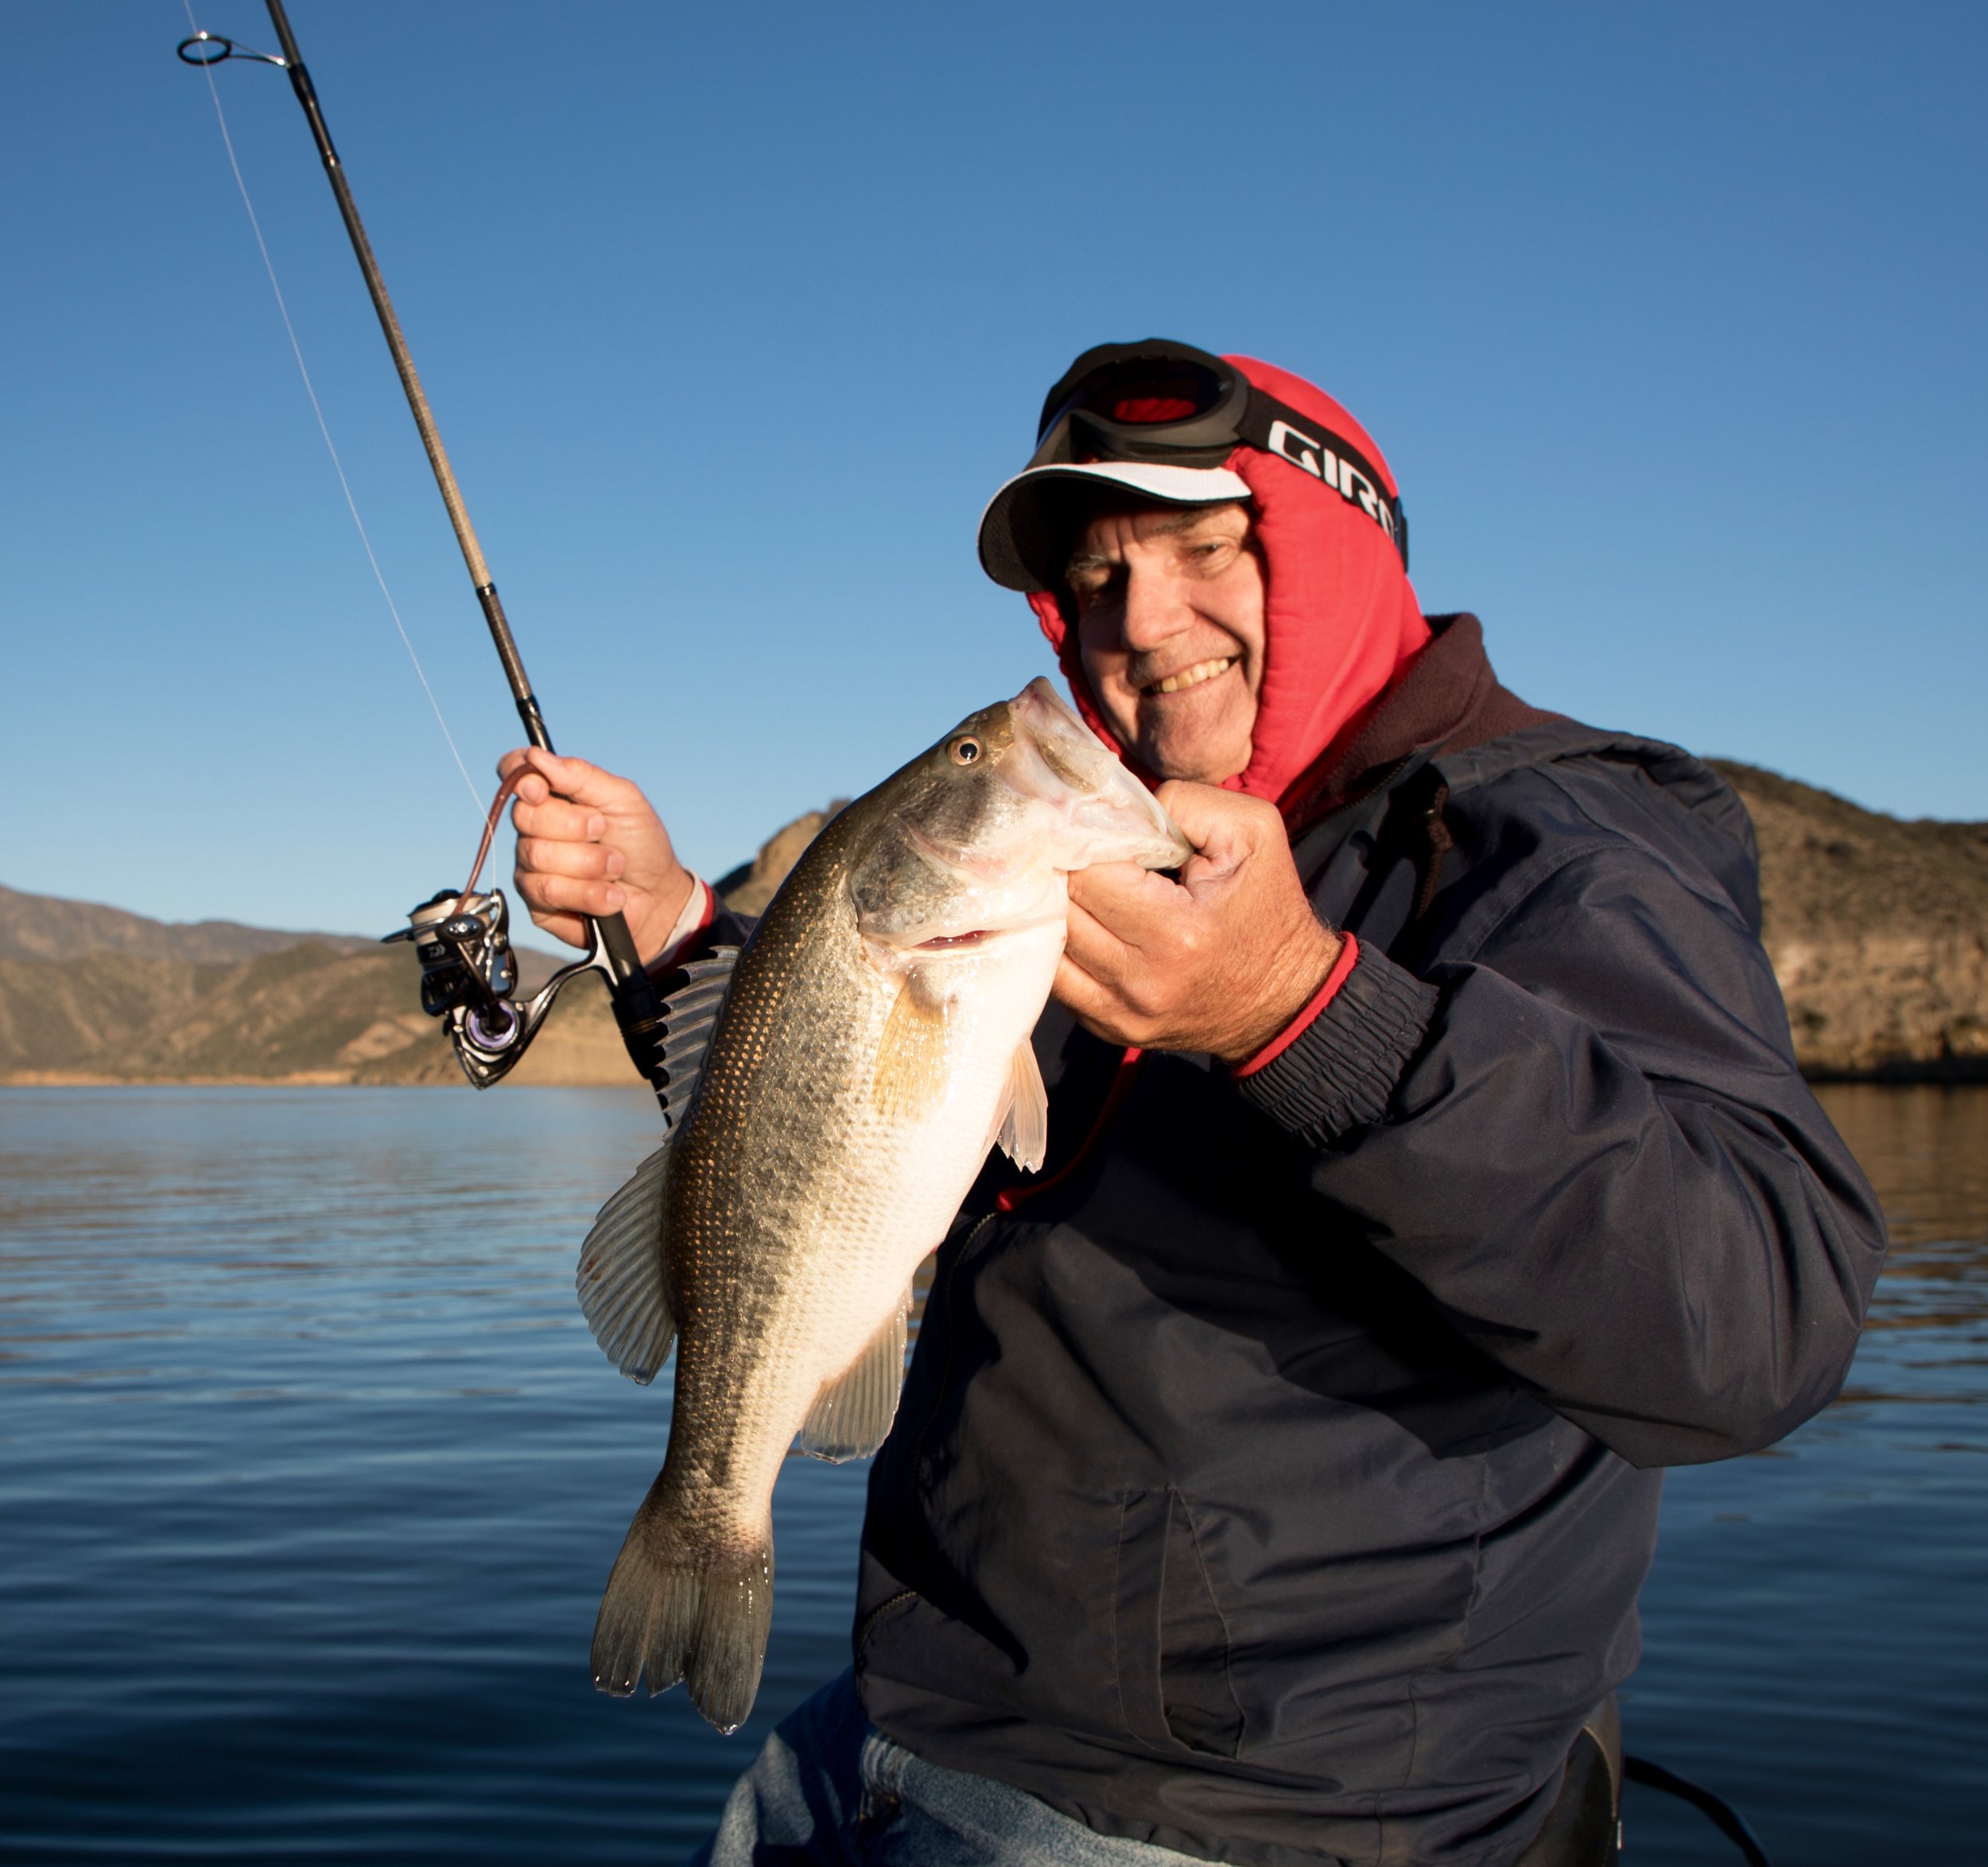 Fishing With The Legend George Kramer! A Quick 3 Hour Pre-Fish @ Pyramid  Lake — Welcome To The BBZ World - theBBZtv - How to Catch Monster Bass &  Other Fish - Fishing Videos & How-To - Bill Siemantel